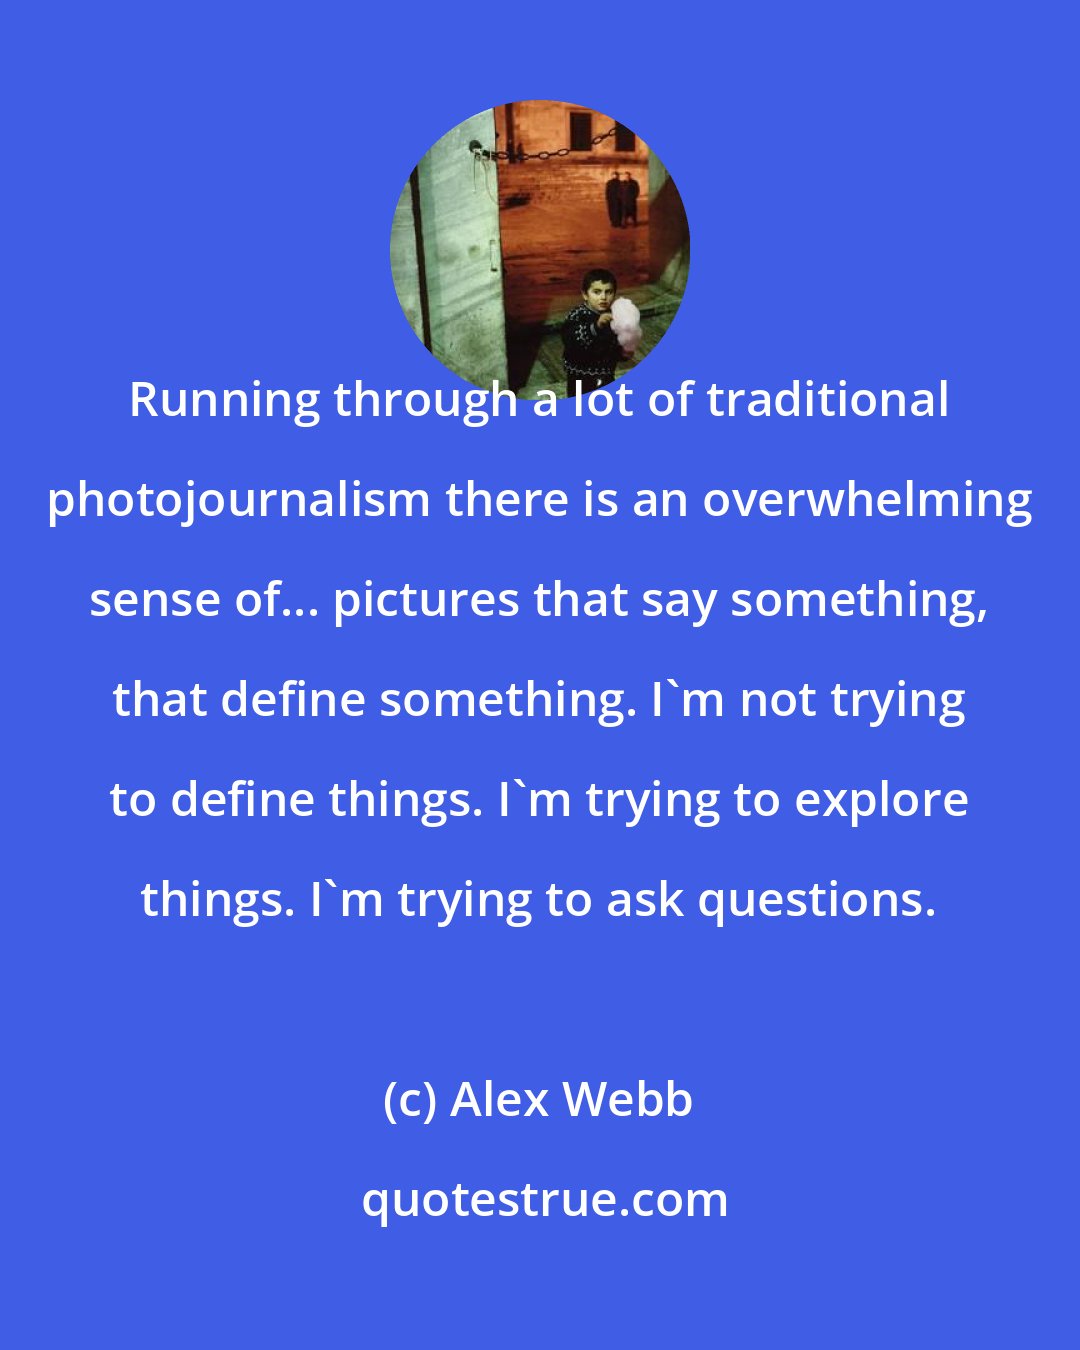 Alex Webb: Running through a lot of traditional photojournalism there is an overwhelming sense of... pictures that say something, that define something. I'm not trying to define things. I'm trying to explore things. I'm trying to ask questions.